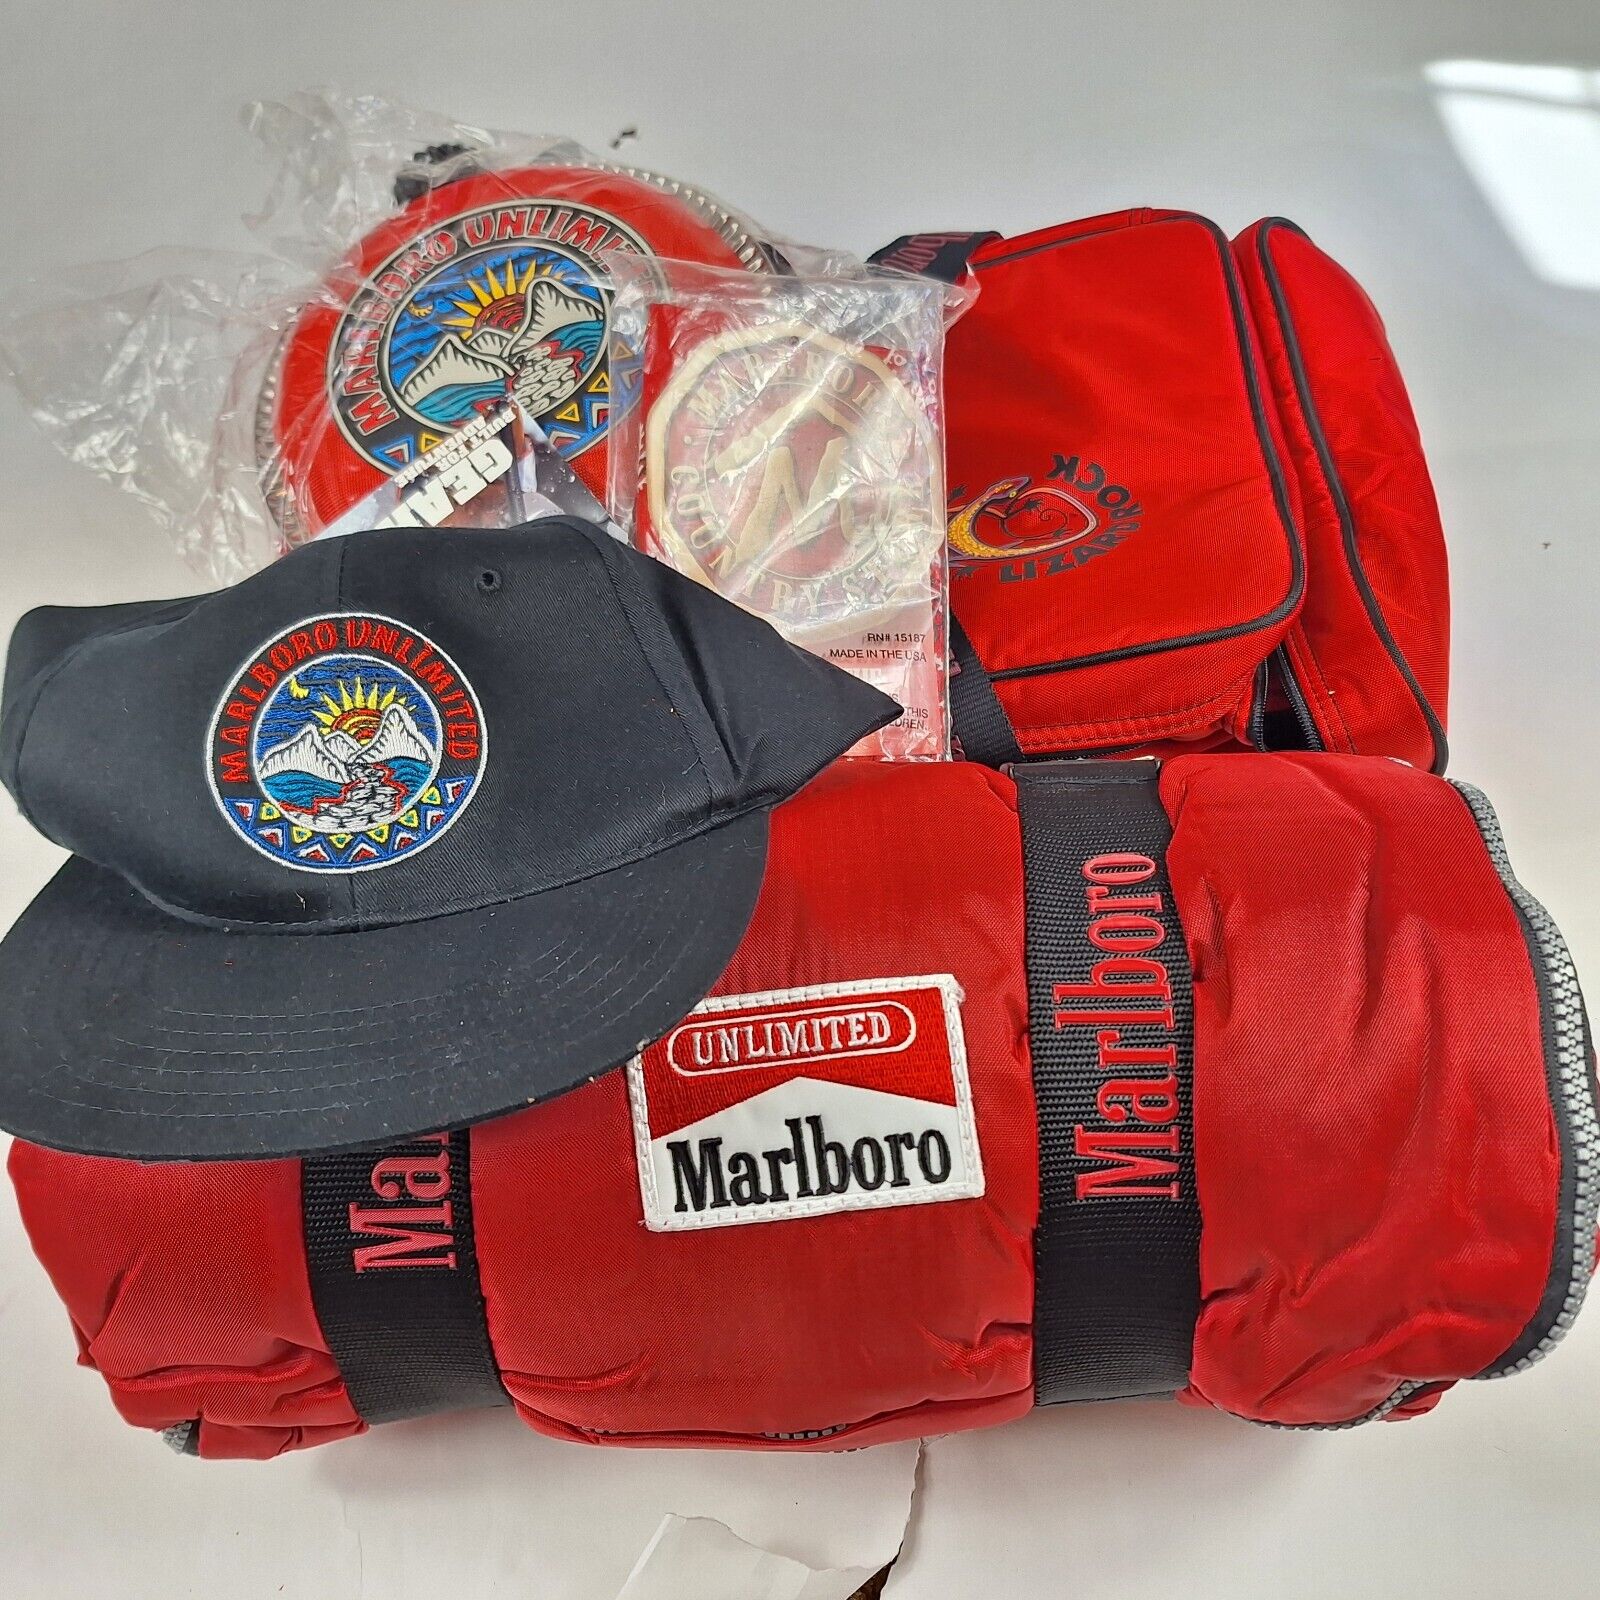 Marlboro Unlimited Adventure Gear Lot Of Camping Gear New With Tags Sleeping Bag